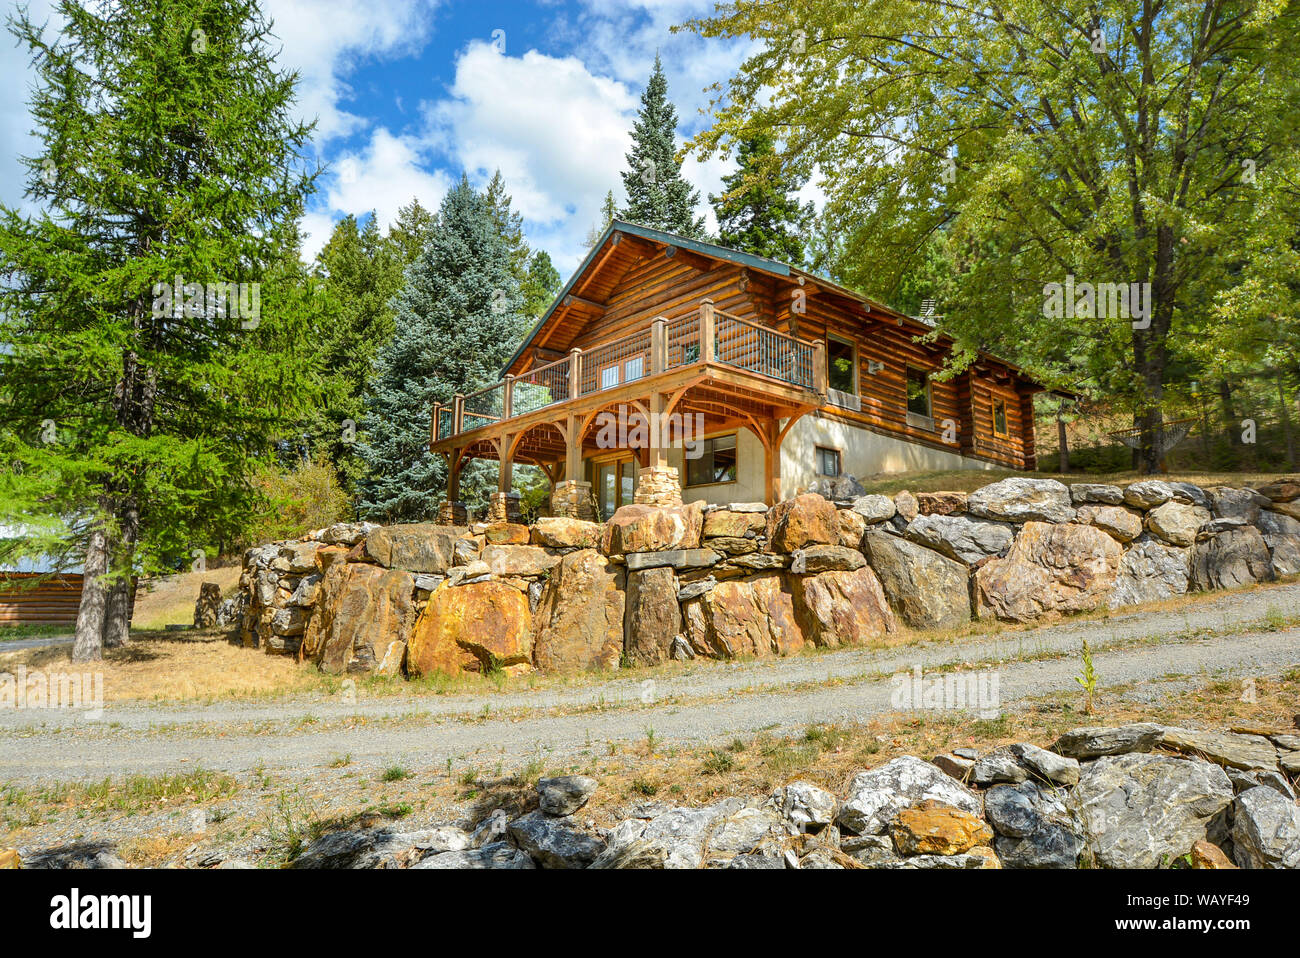 A picturesque rustic log home in the mountains surrounded by pine trees on a rocky hillside in Coeur d'Alene, Idaho. Stock Photo